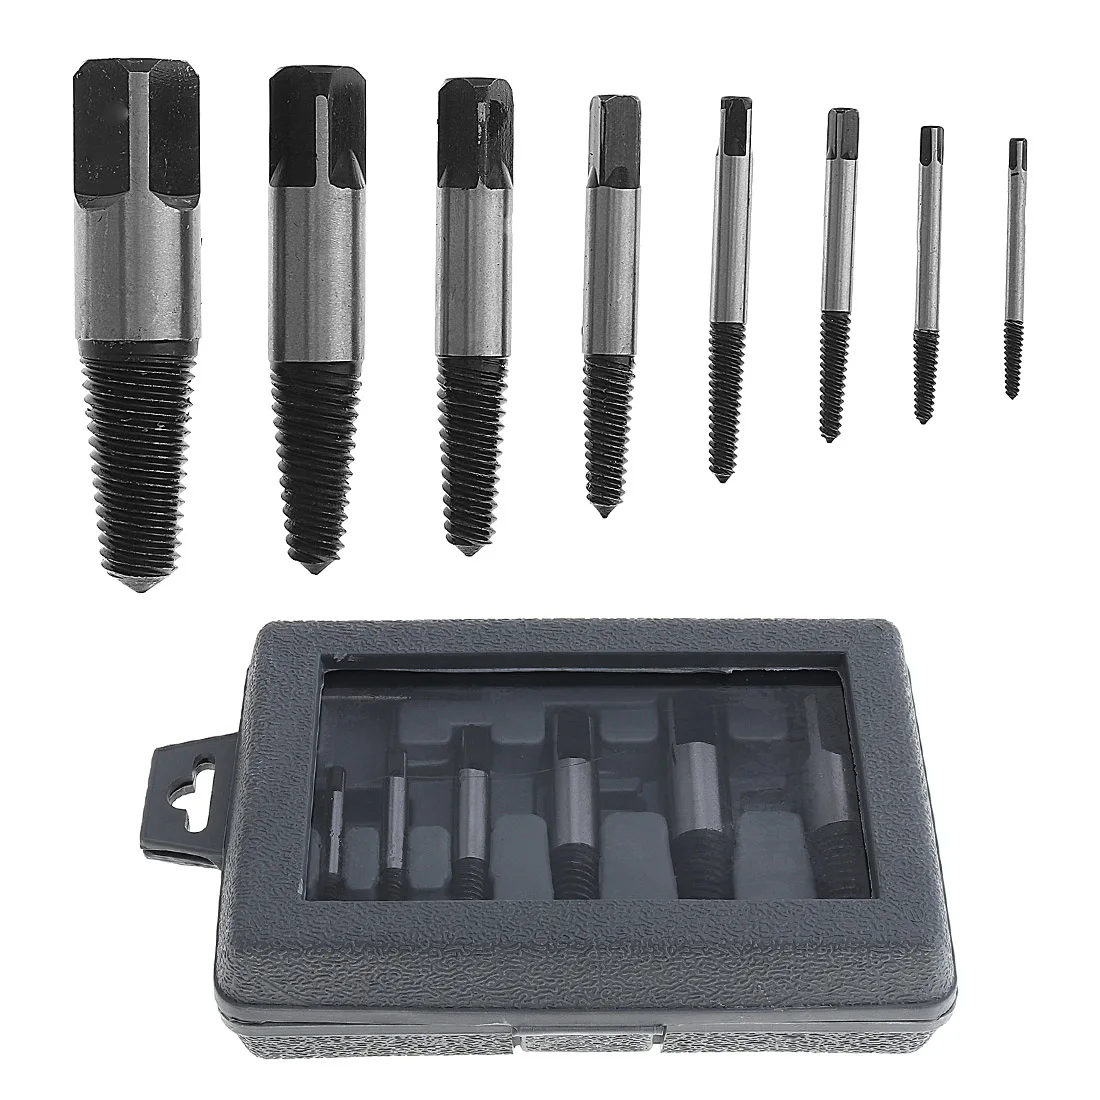 8pcs Broken Screw Extractor High Quality Carbon Steel Drill Bits Set Damaged Bolt Remove Out Tools Kits broken nut screw extractor set 22 33 in 1 hss broken screw removal splitting tools drill bits heavy duty drilling tool kits